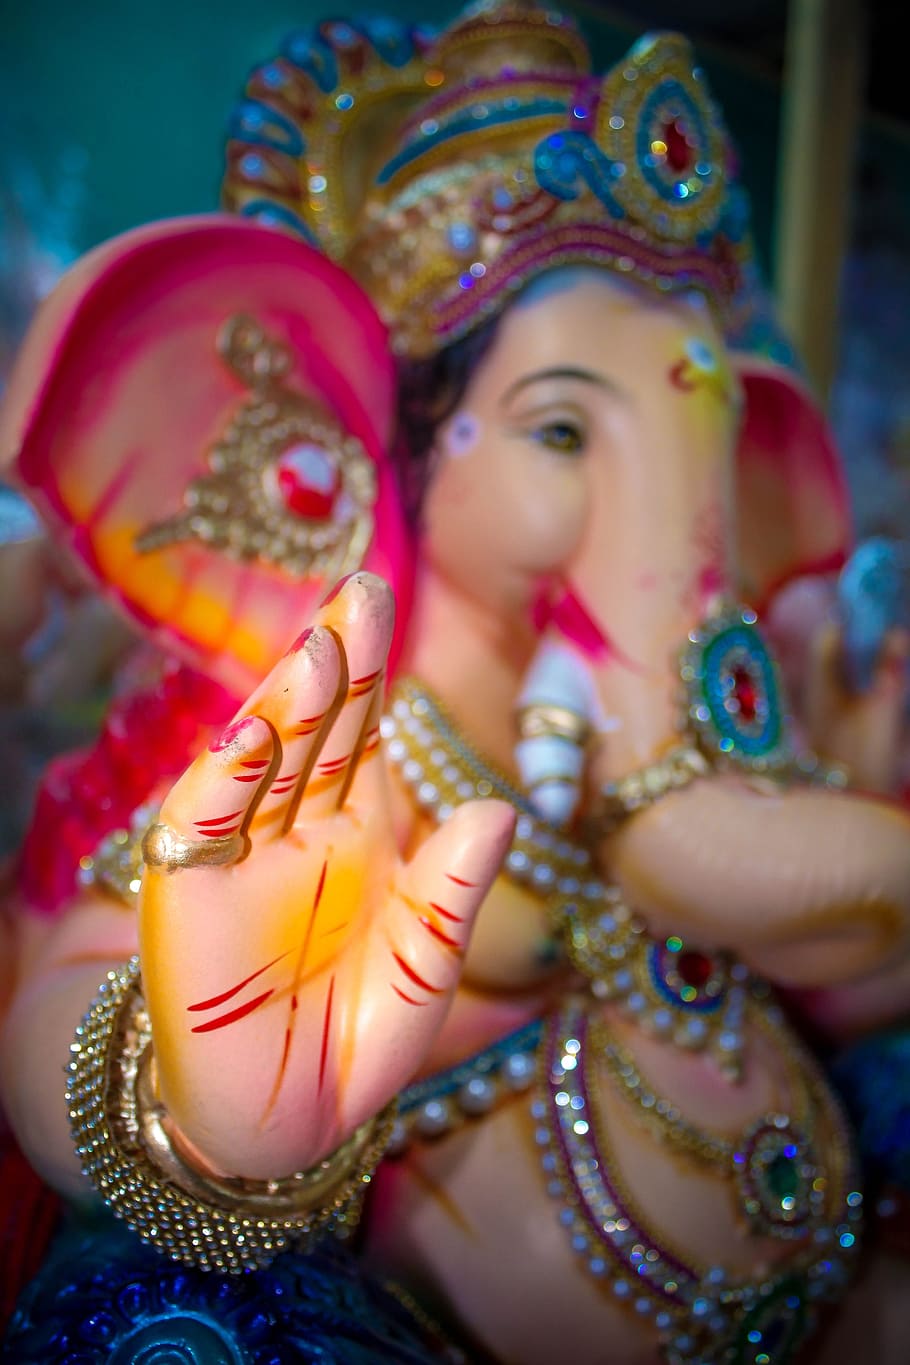 lord ganesha figurine, lord ganesh, lord ganesha, hinduism, one person, portrait, women, traditional clothing, focus on foreground, celebration